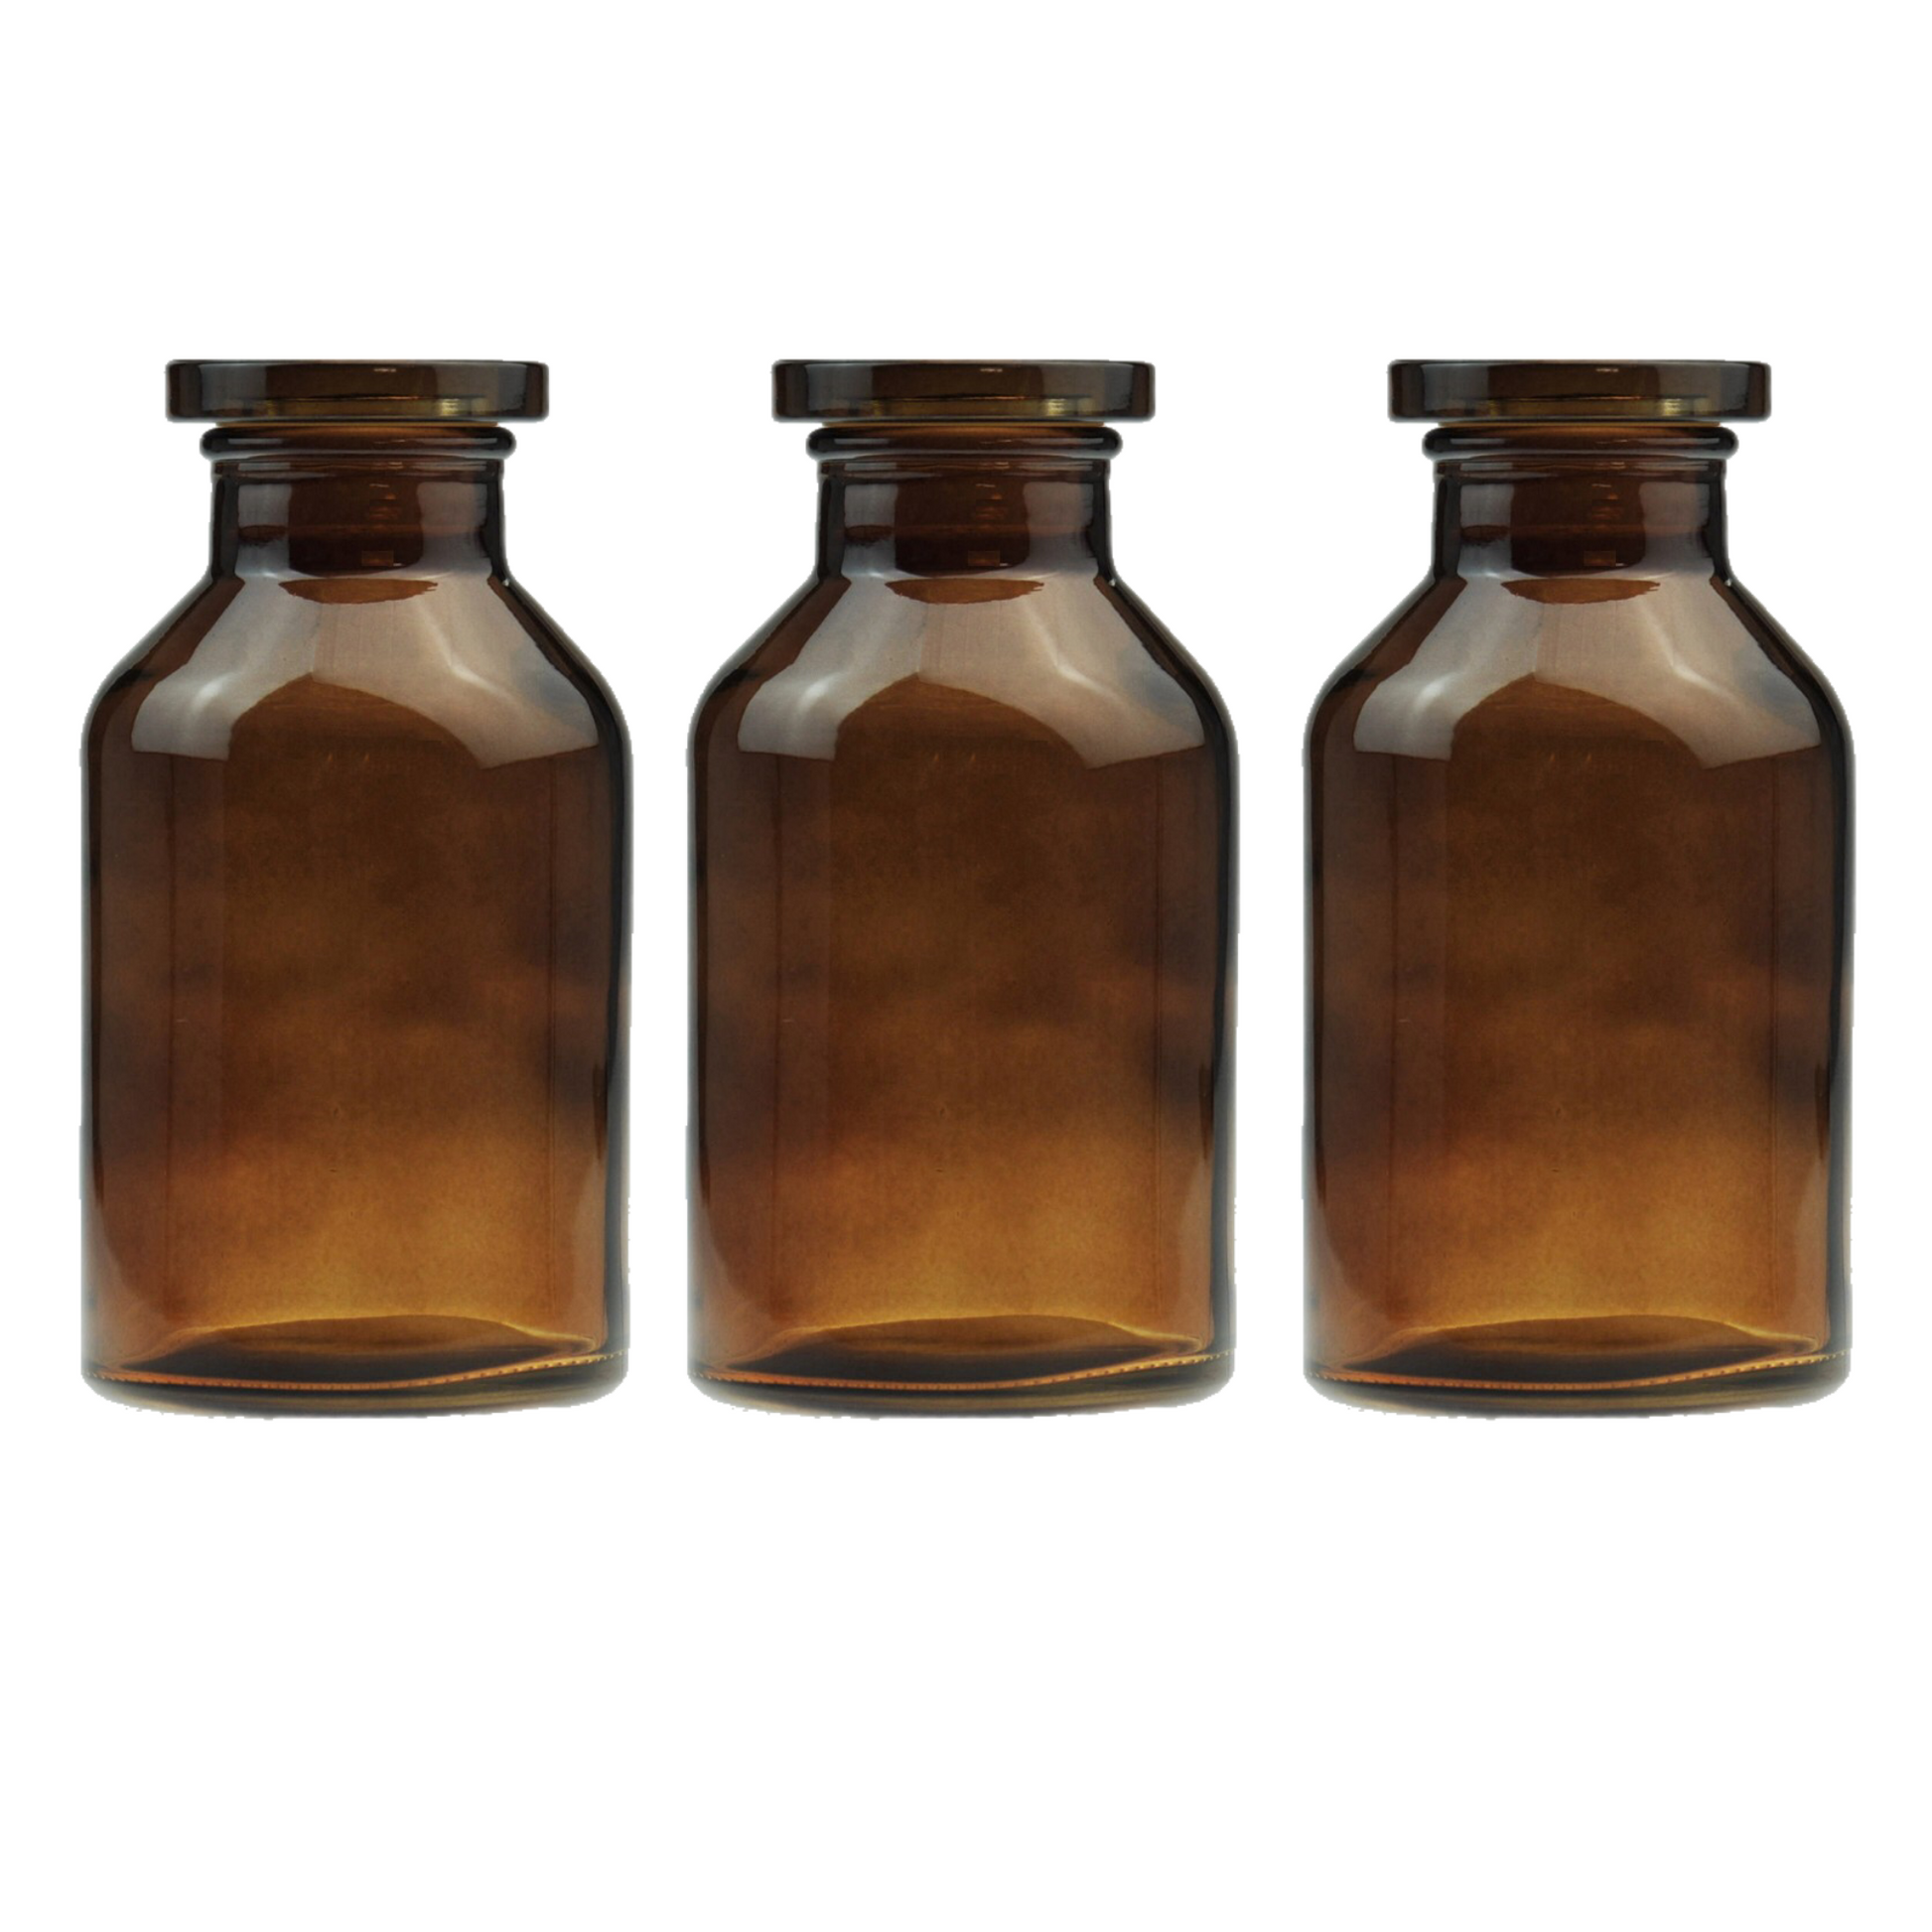 Vintage look wide mouth amber glass Apothecary jar for storing handmade cleaning products and supplies that you can purchase online Australia.